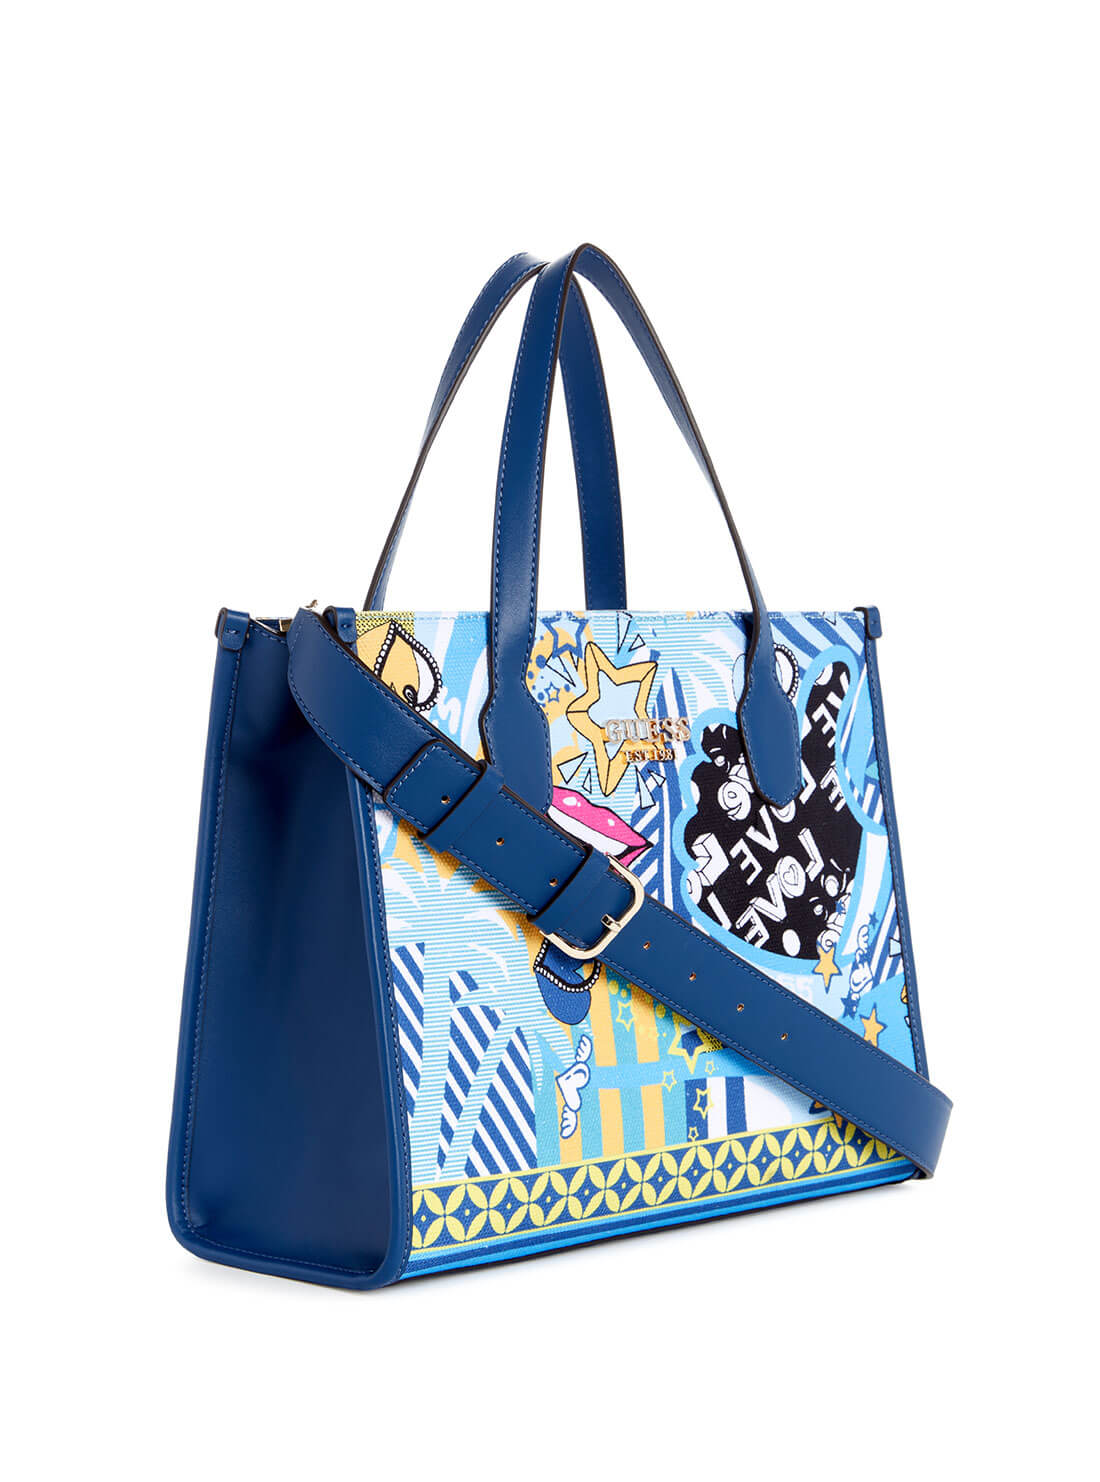 Blue Graphic Silvana Small Tote Bag | GUESS Women's Handbags | side view